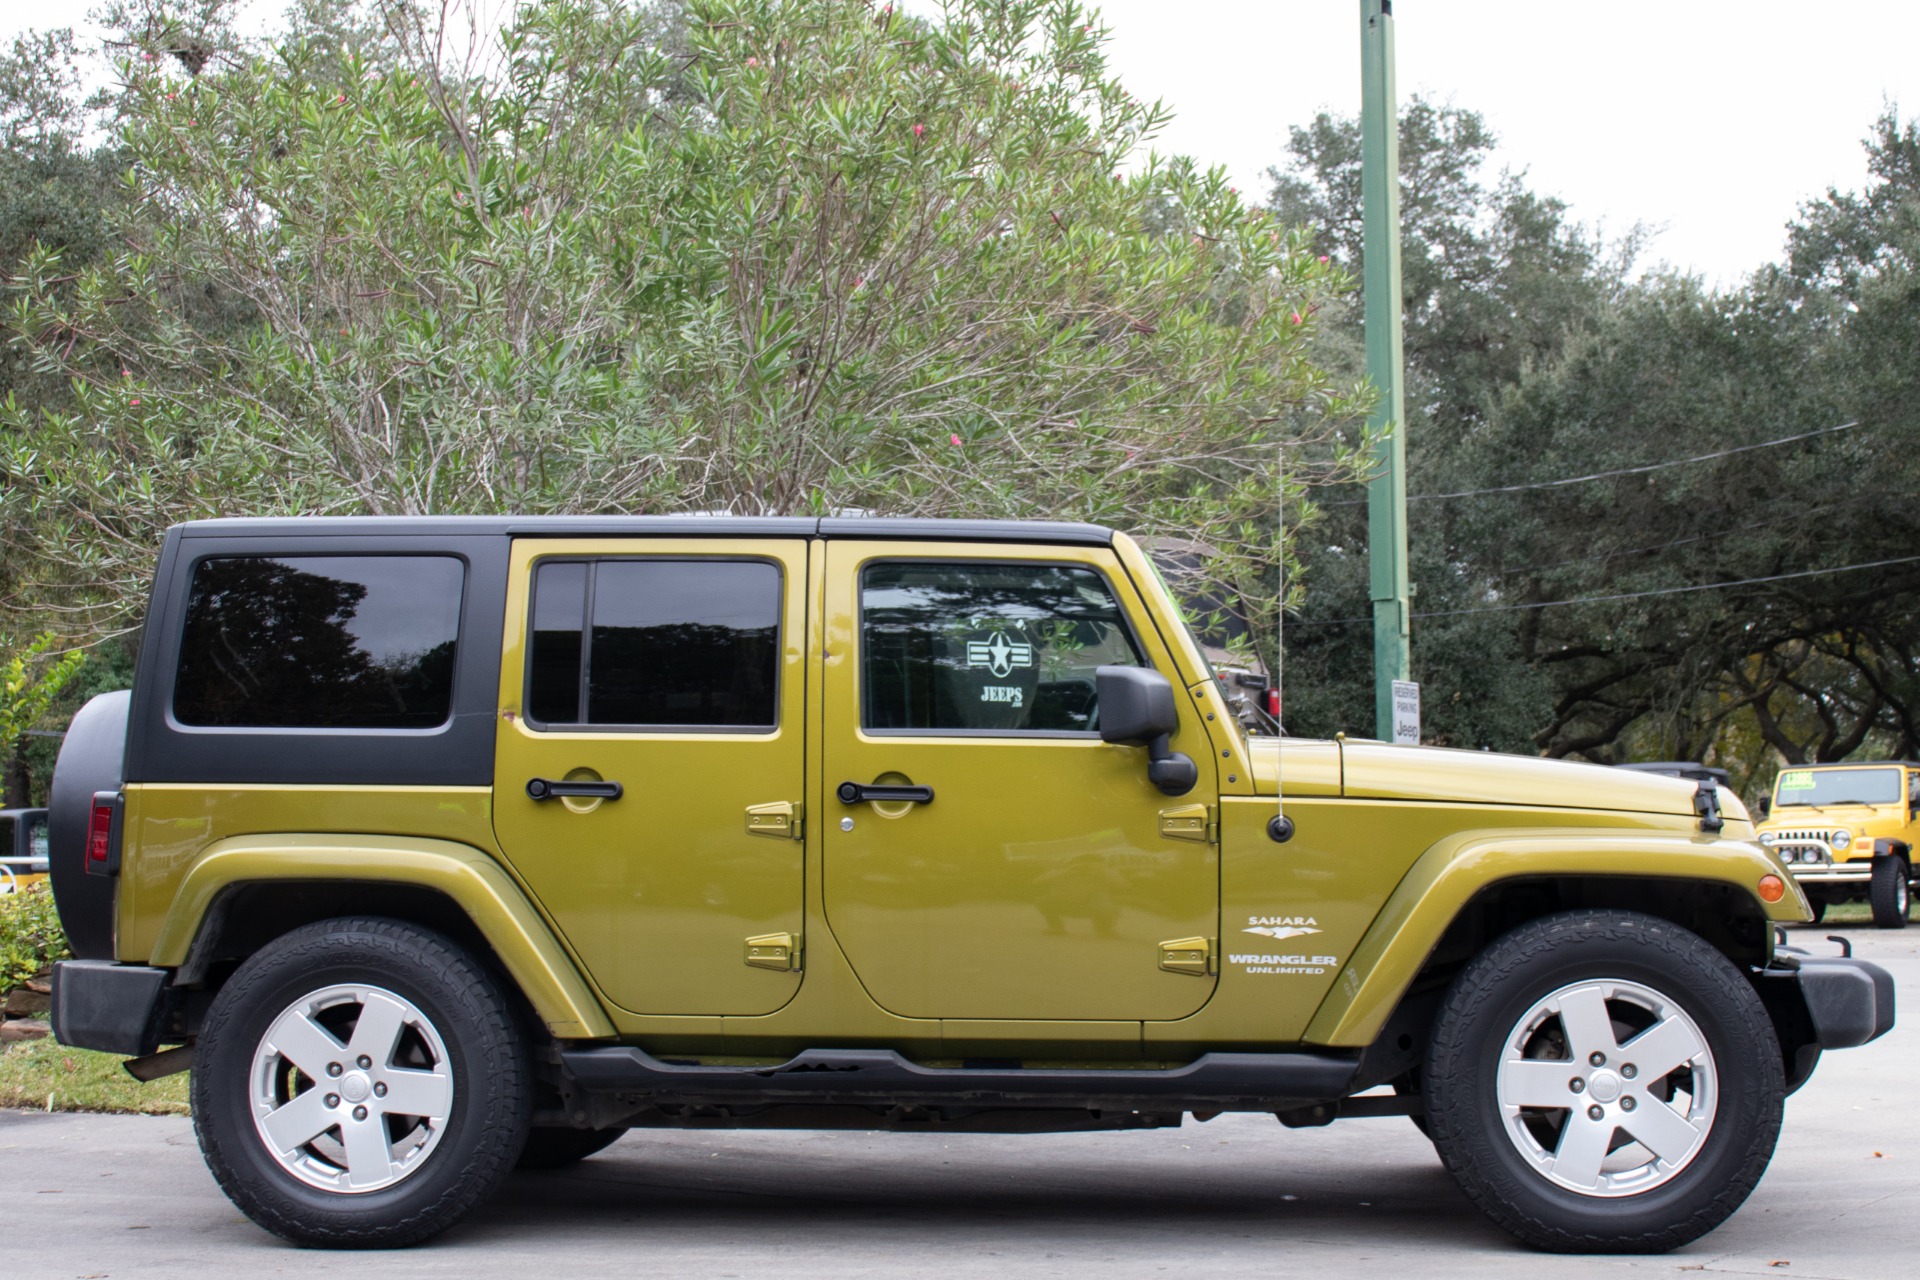 Used 2007 Jeep Wrangler Unlimited Sahara For Sale ($15,995) | Select Jeeps  Inc. Stock #139894